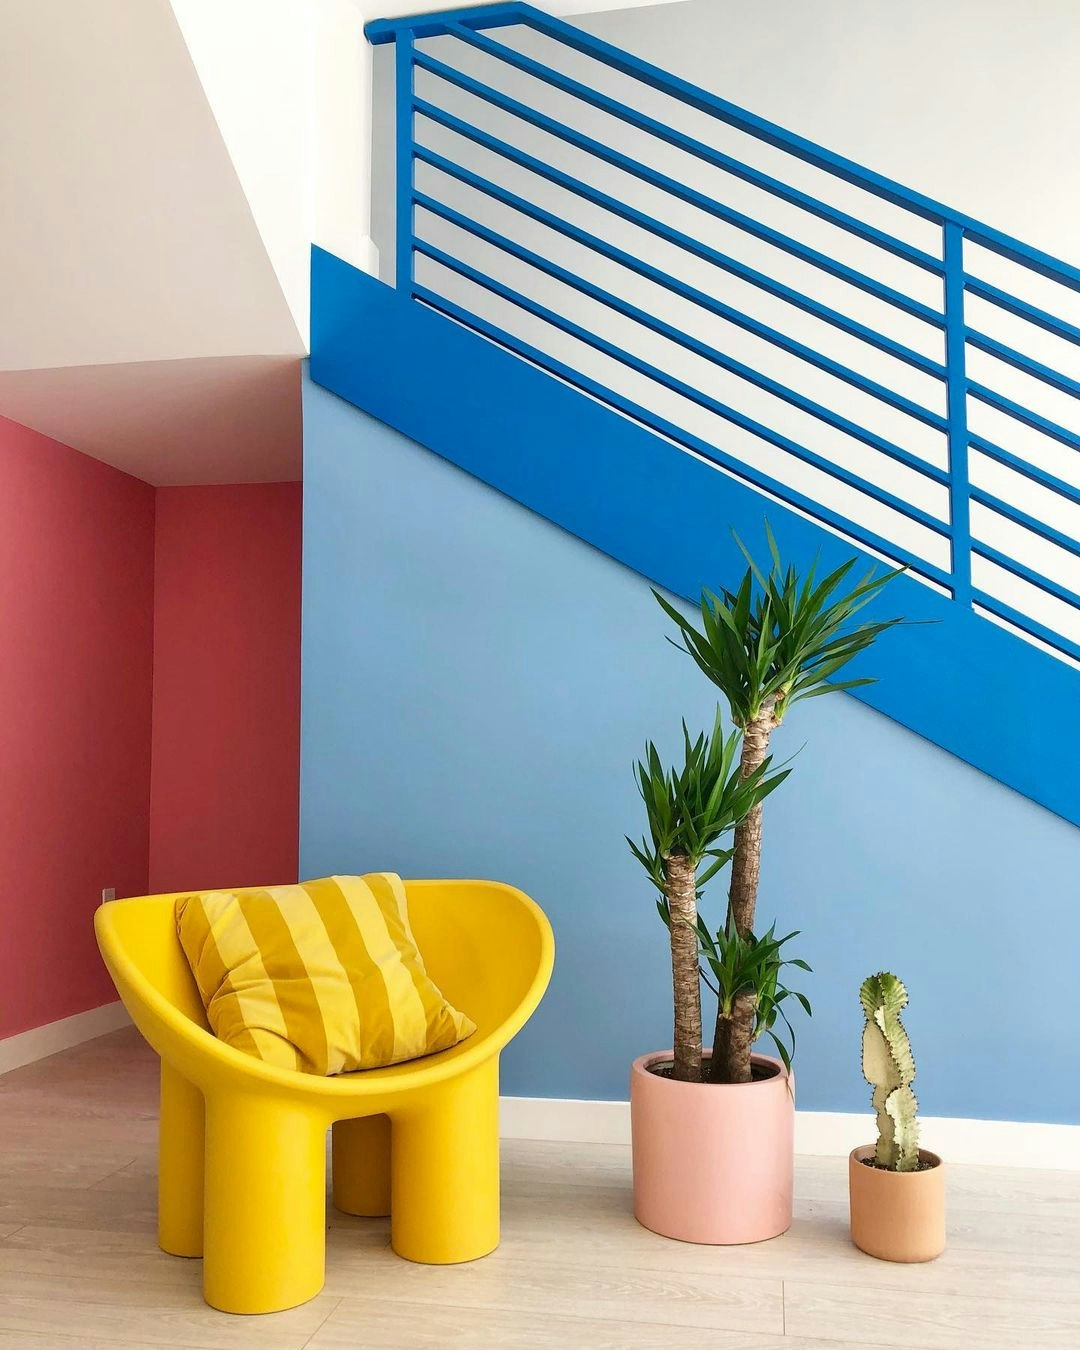 Create shapes and a sense of play with color. Photo: @chloefleury